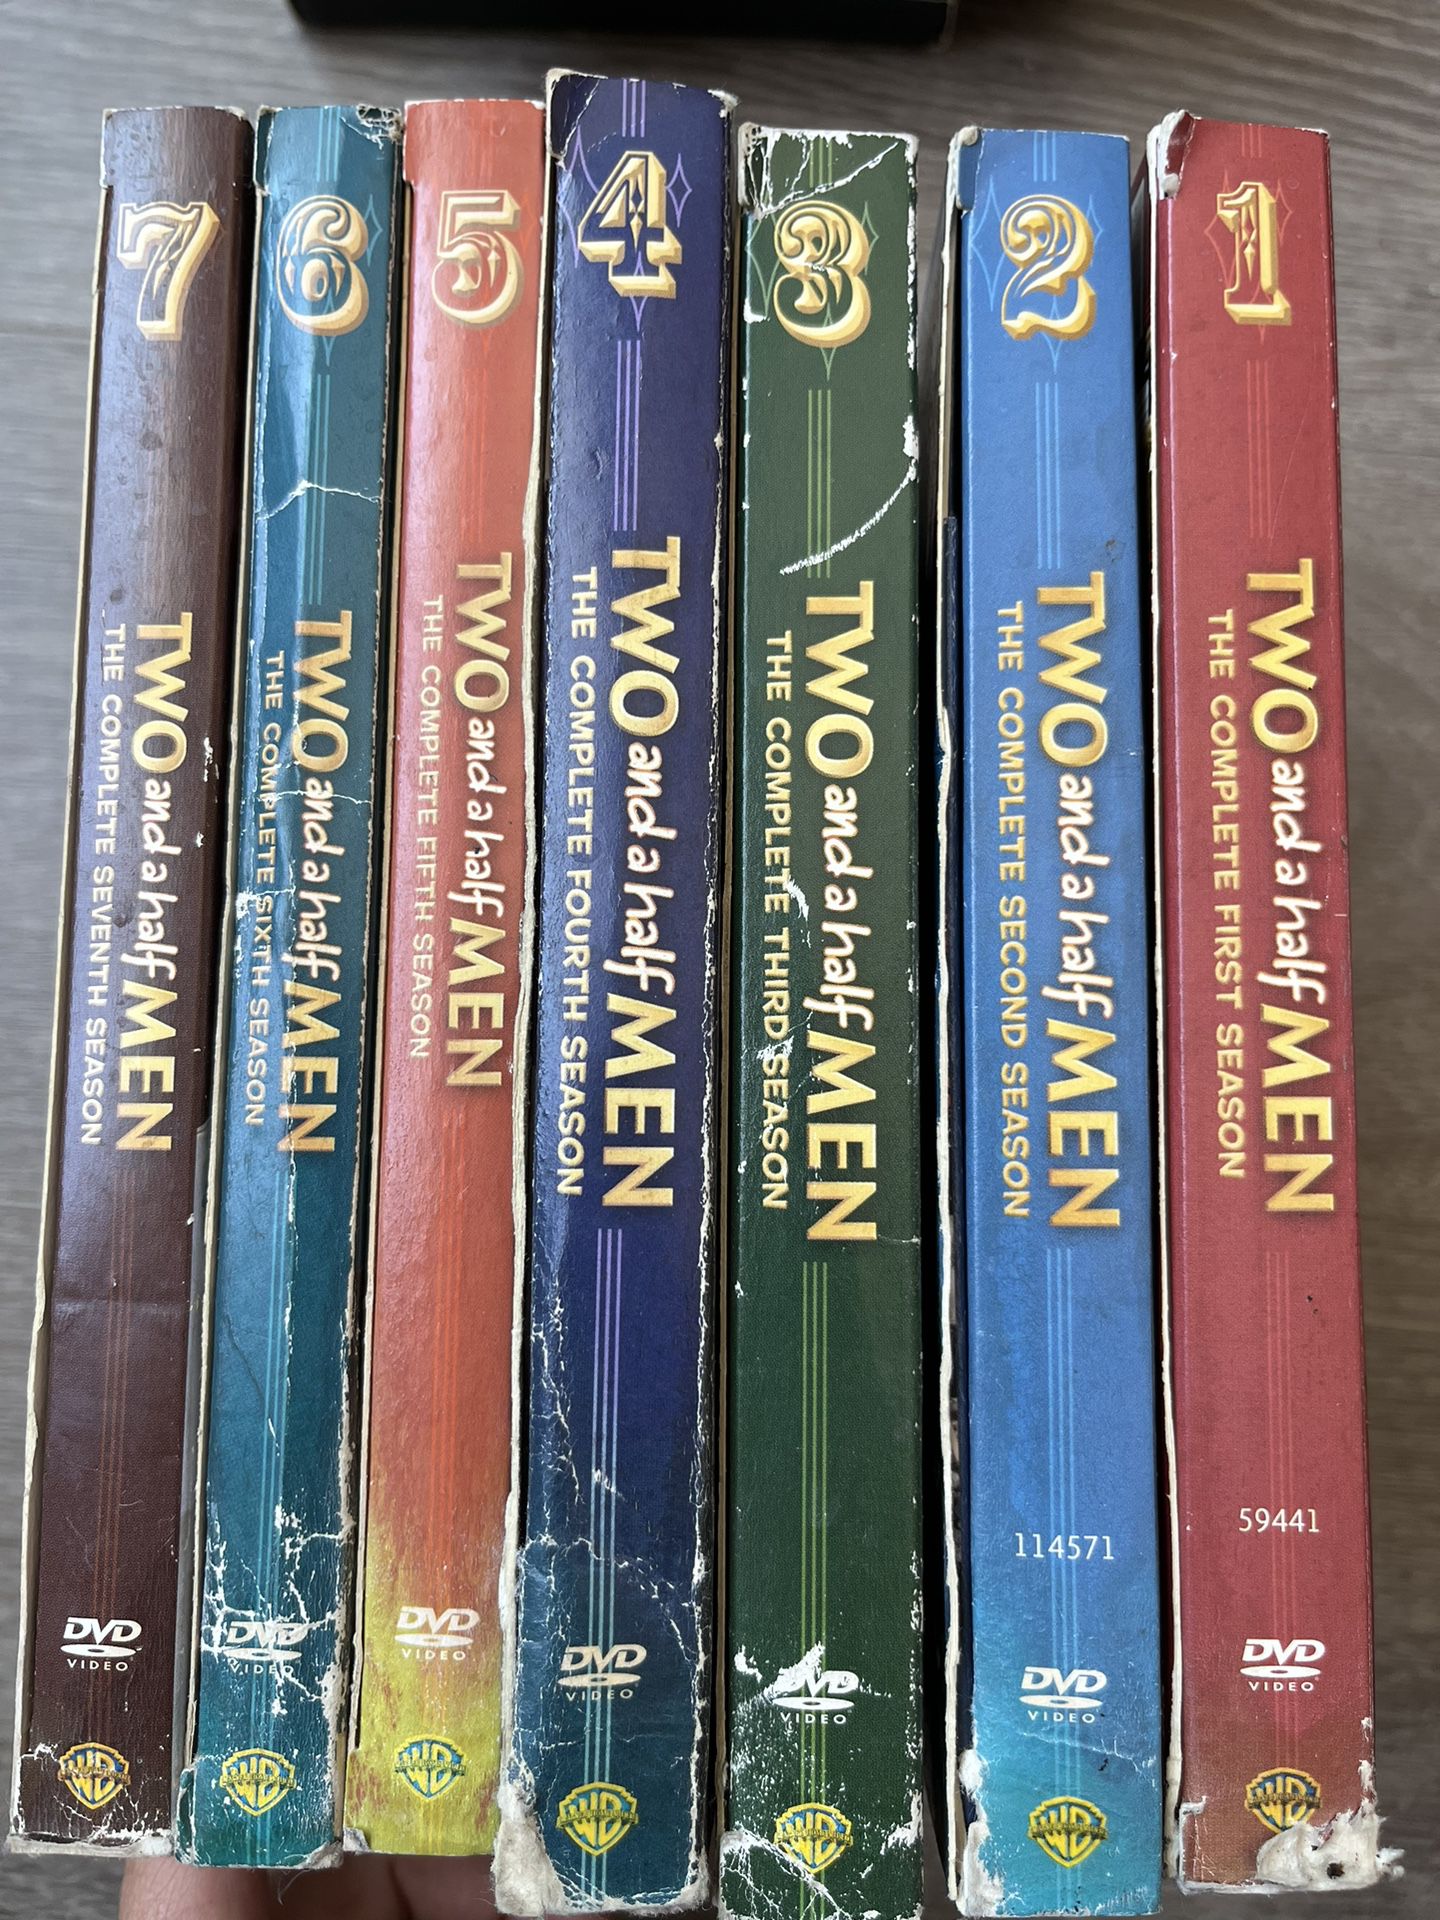 Two and a half Men Complete seasons 1-7 